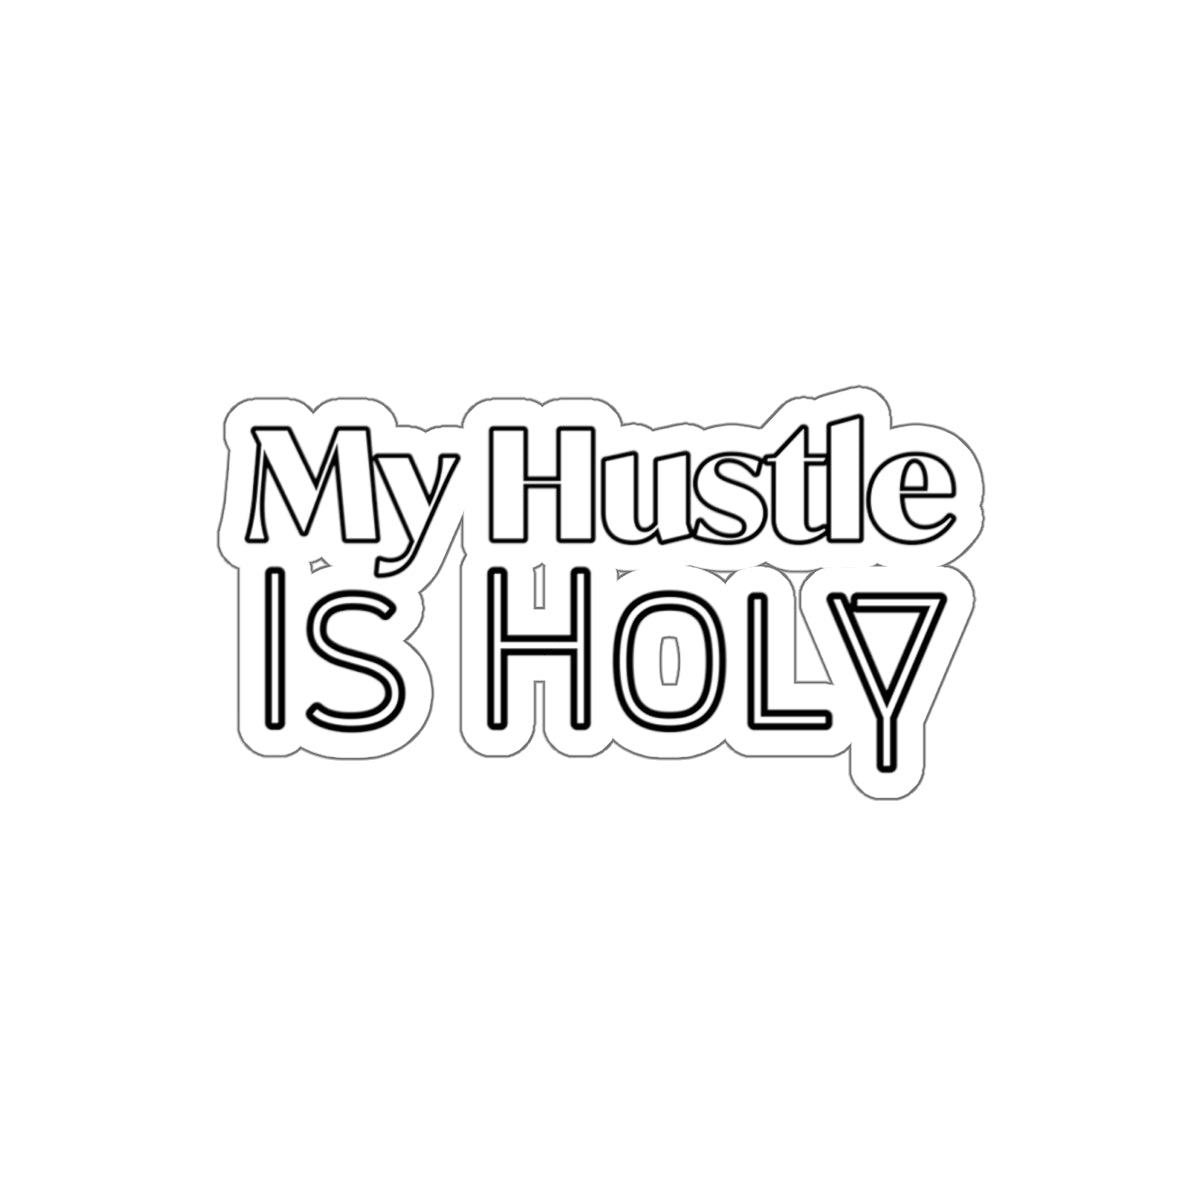 MY HUSTLE IS HOLY Decal/Sticker